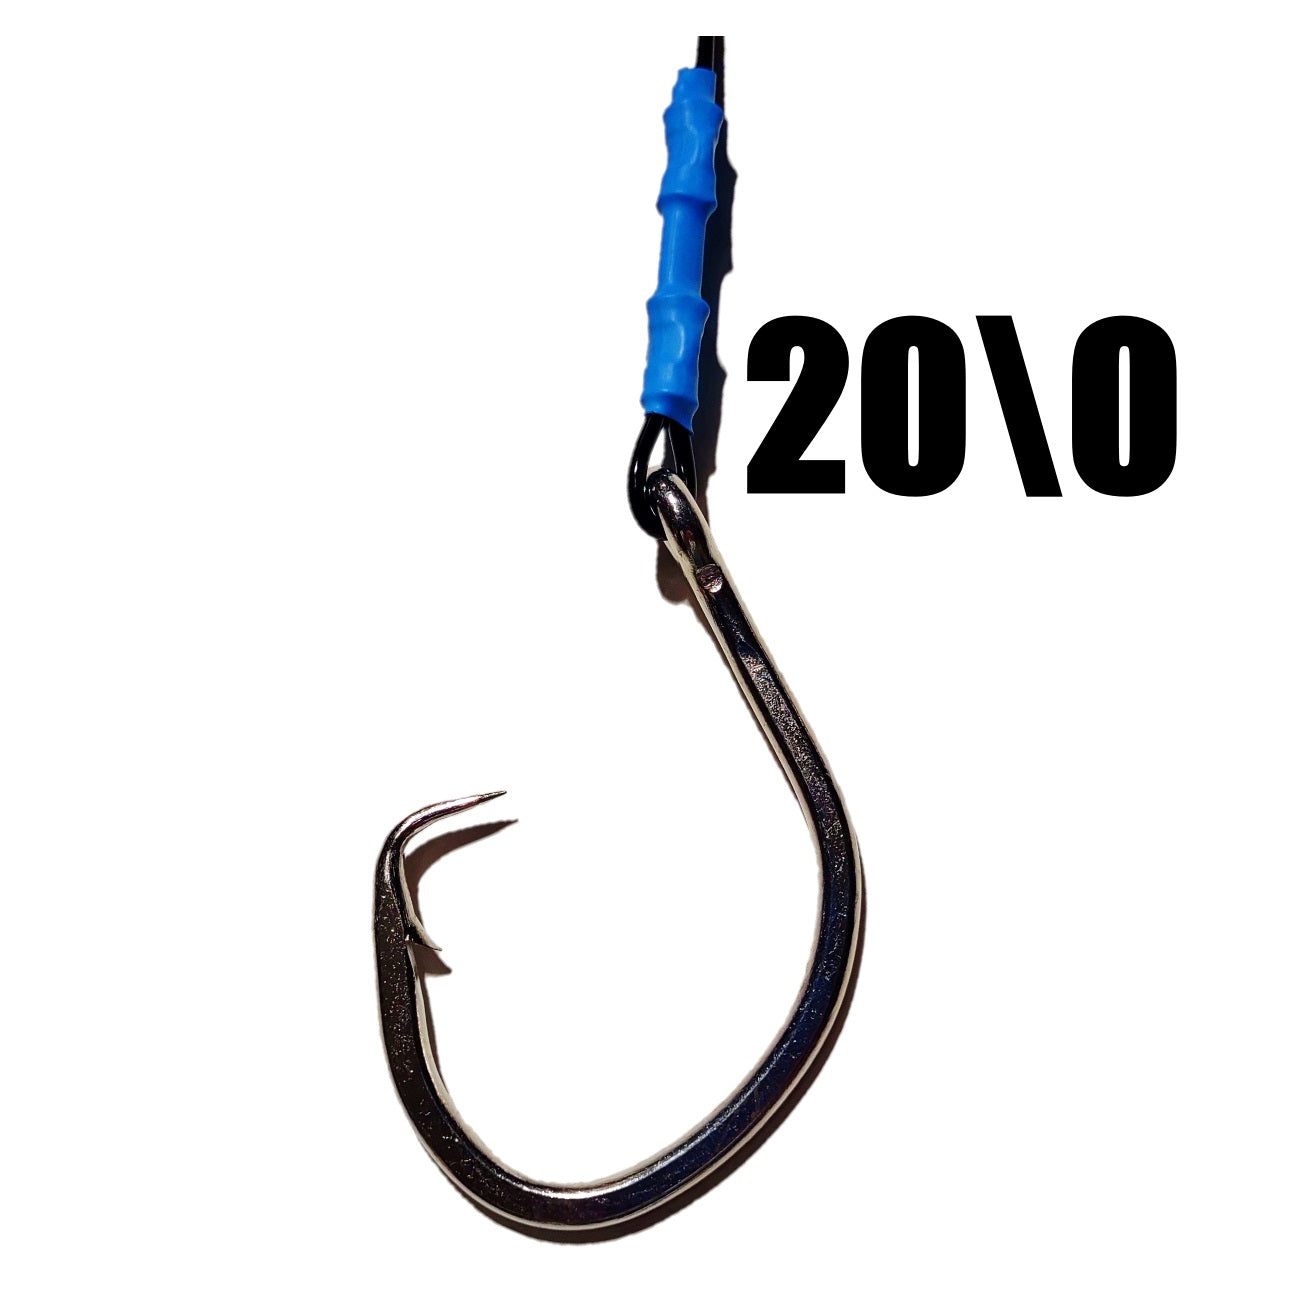 10 Foot - Cable and Mono Combo Shark Leader